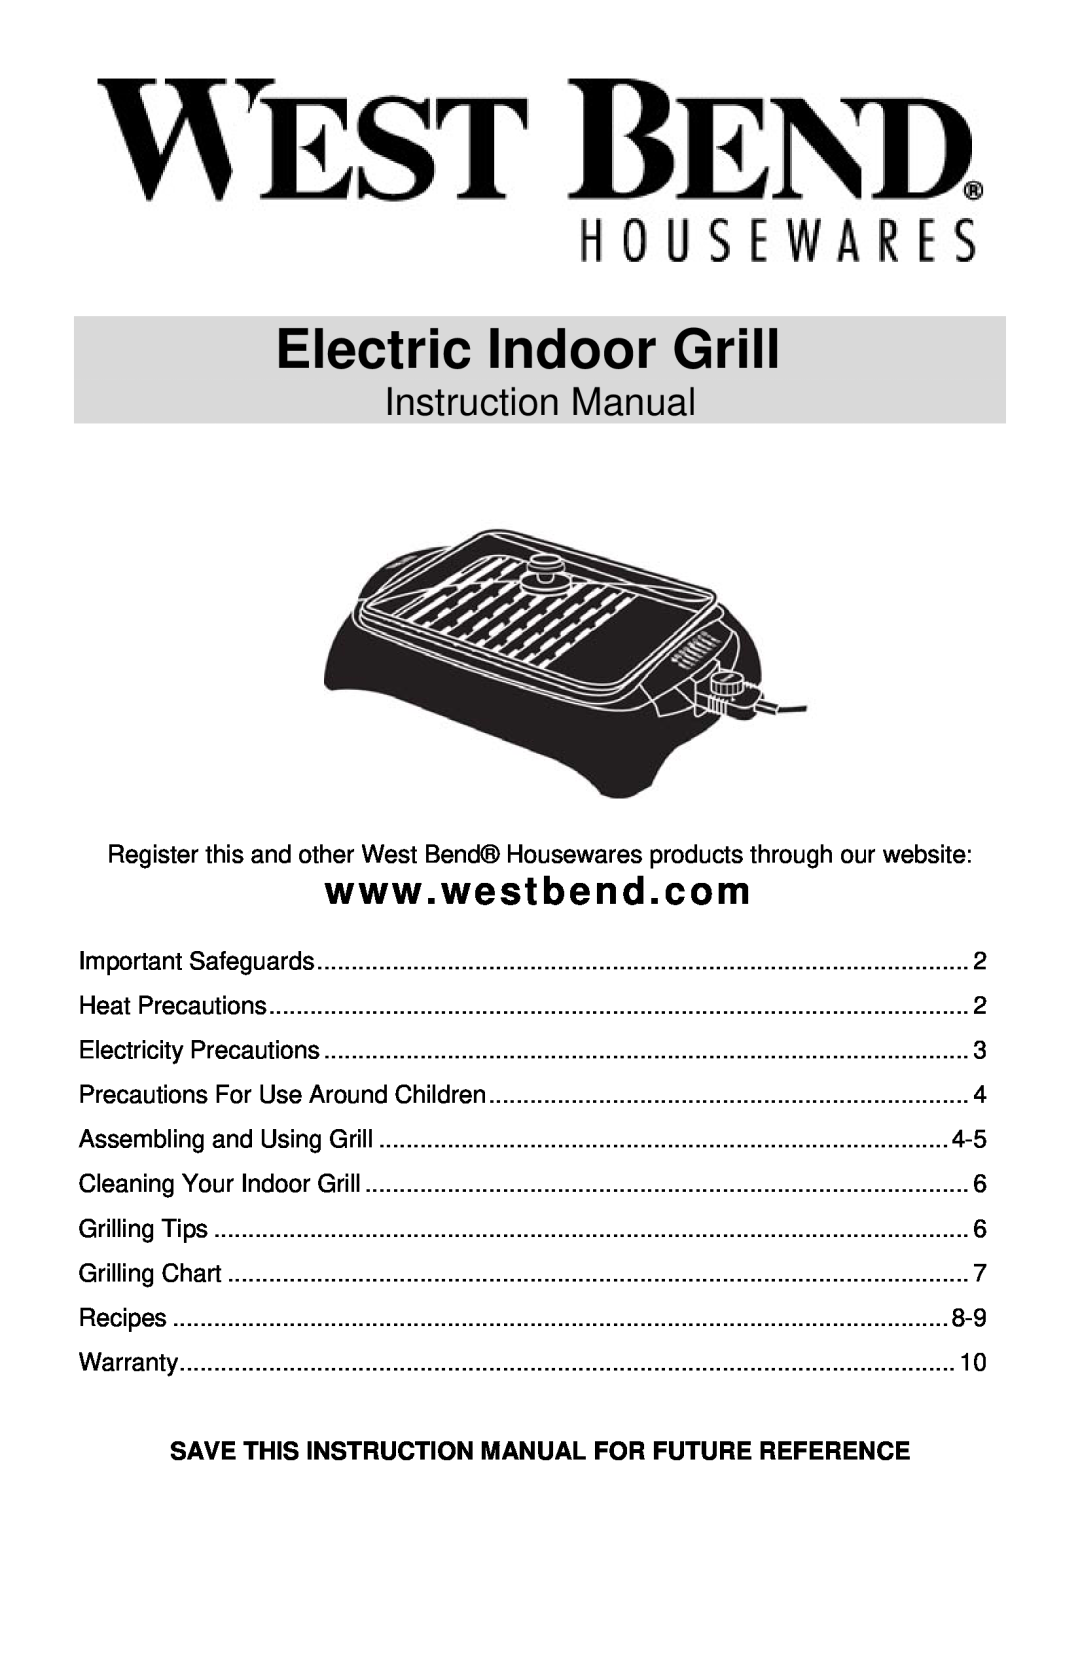 West Bend Electric Indoor Grill instruction manual 